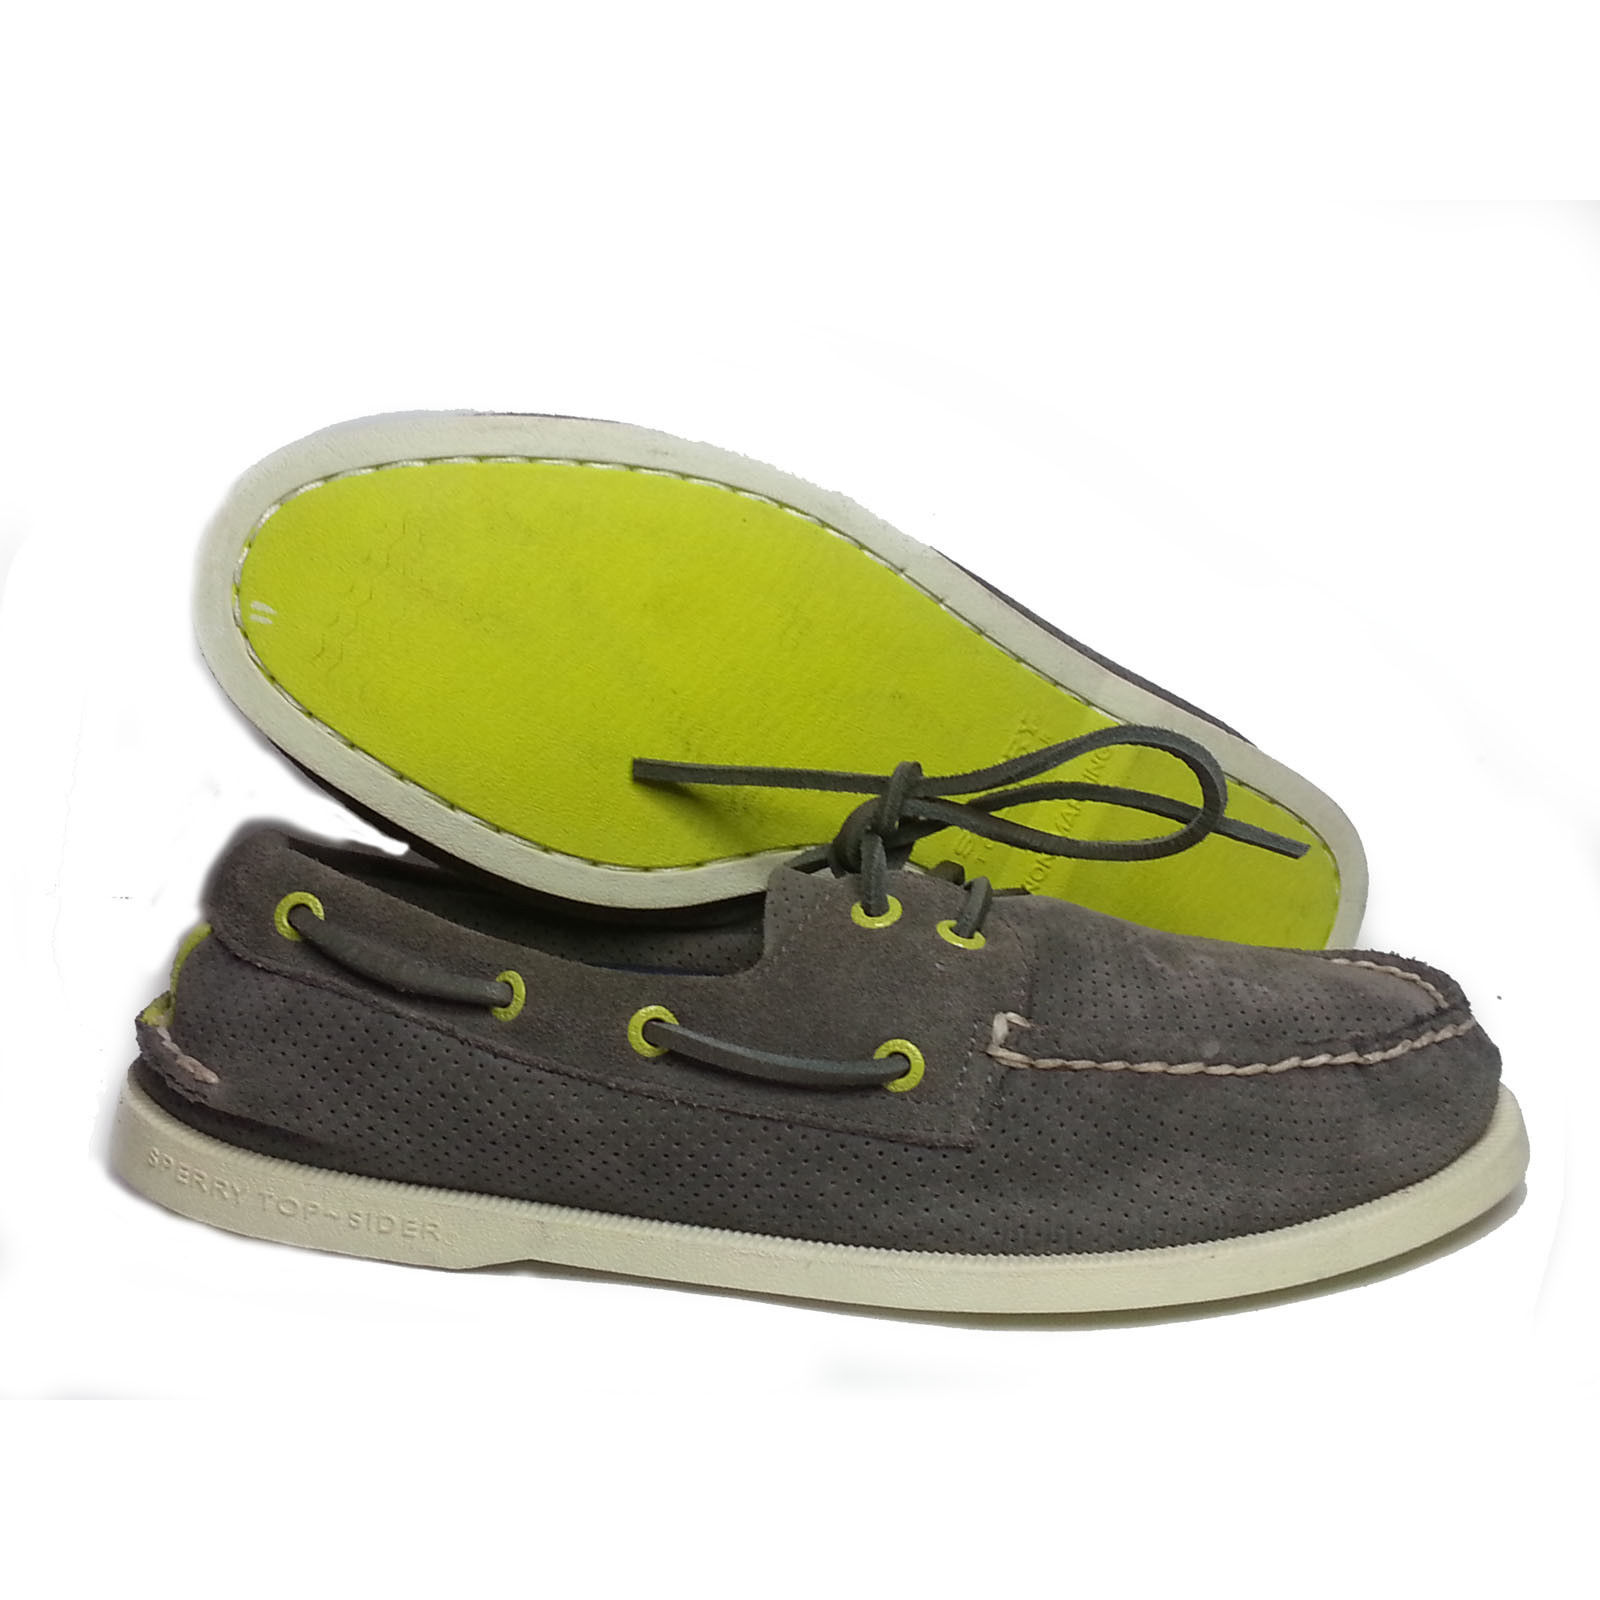 SPERRY Top-Sider Leather Boat Shoes Size 8 M Gray 2-Eyelets Perforated Surface  - $77.55